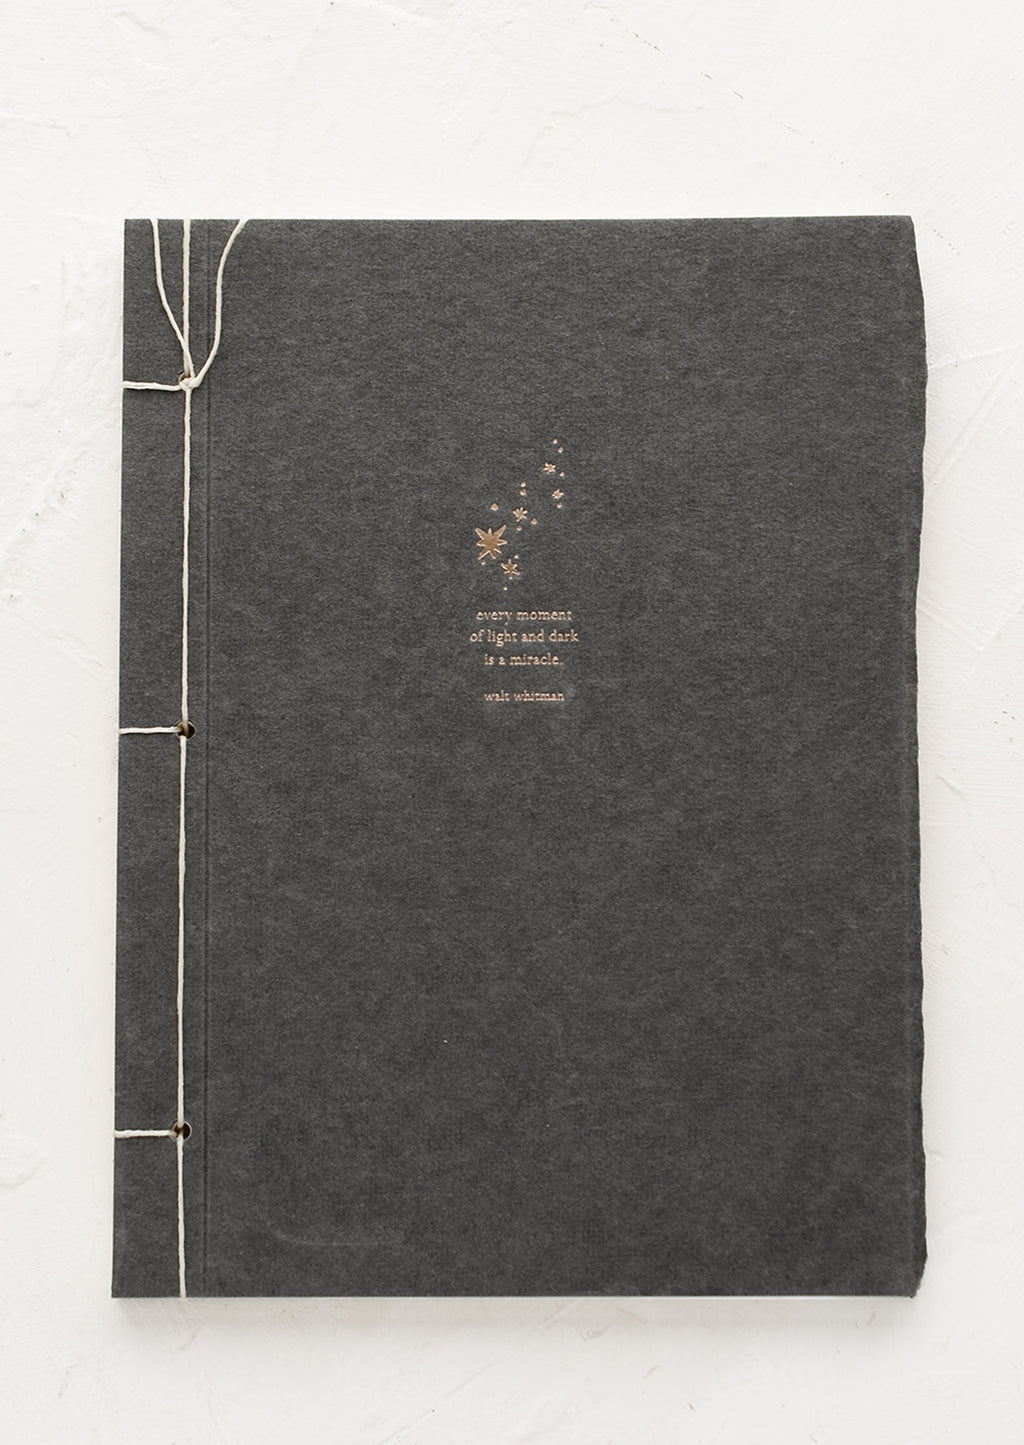 Walt Whitman: A journal with dark grey cover with Walt Whitman quote.